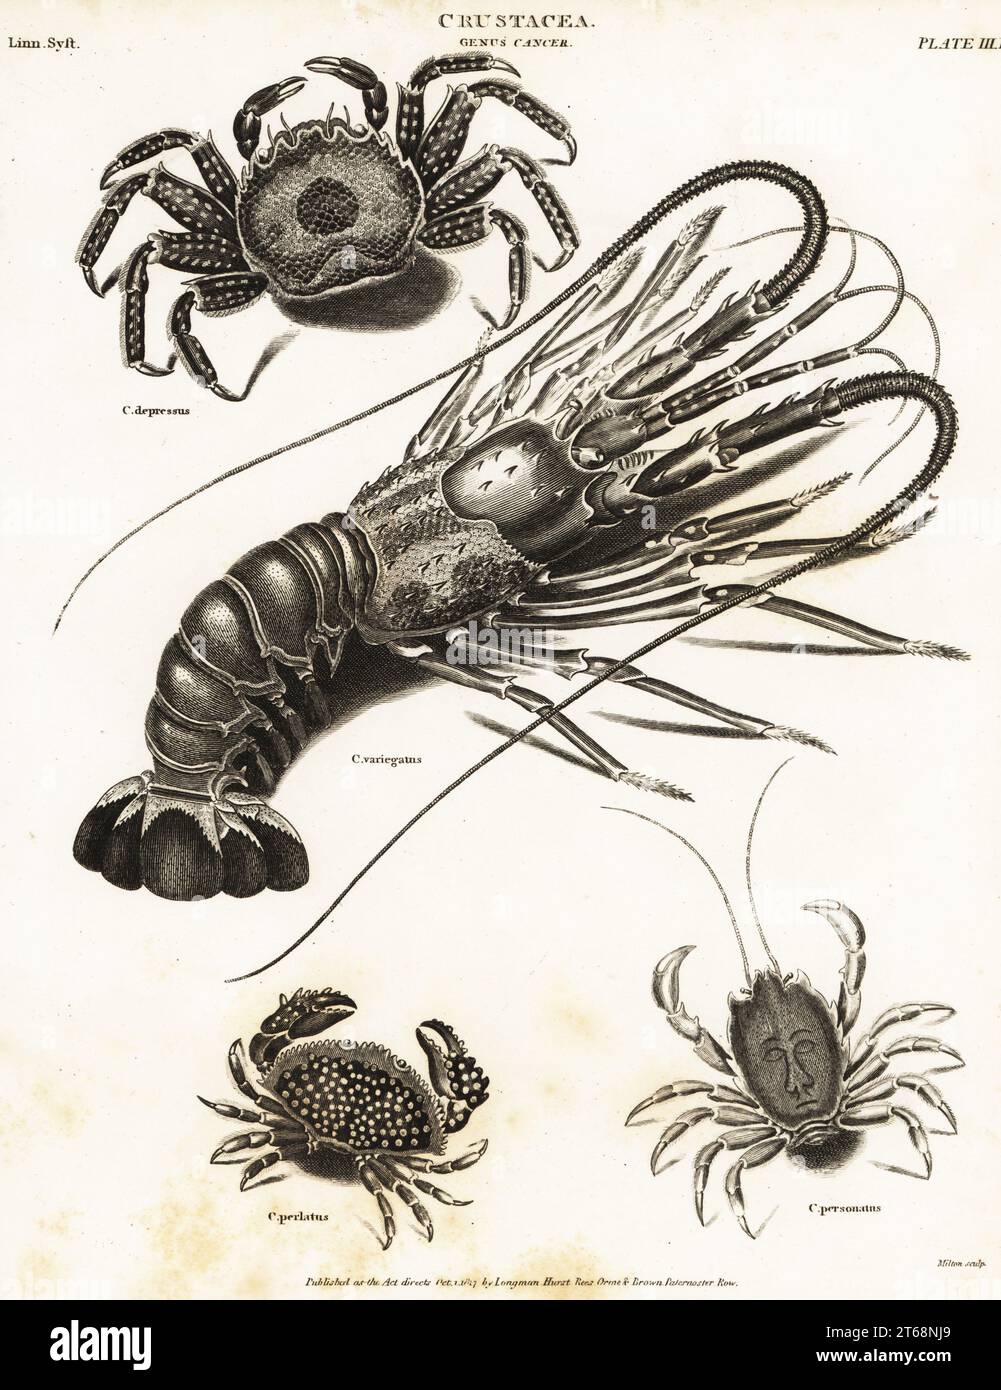 Tidal spray crab, Plagusia depressa, common lobster, Homarus gammarus (mislabeled Cancer variegatus), red rock crab, Cancer productus, and masked crab, Corystes cassivelaunus. Copperplate engraving by Milton from Abraham Rees' Cyclopedia or Universal Dictionary of Arts, Sciences and Literature, Longman, Hurst, Rees, Orme and Brown, London, 1817. Stock Photo